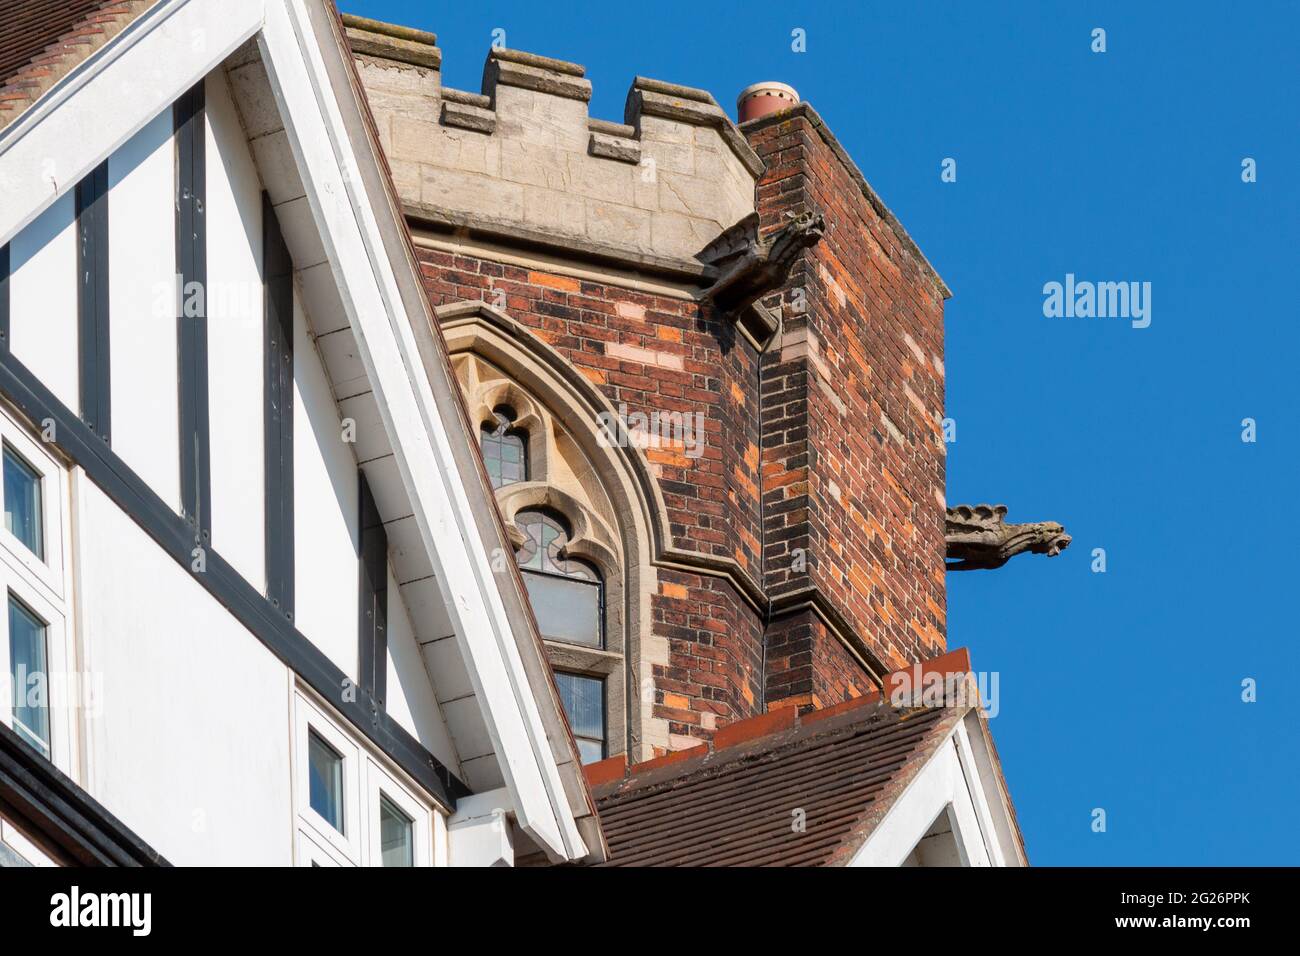 A gargoyle protudes from the castellated tower of Homerton College, Cambridge, UK. Stock Photo